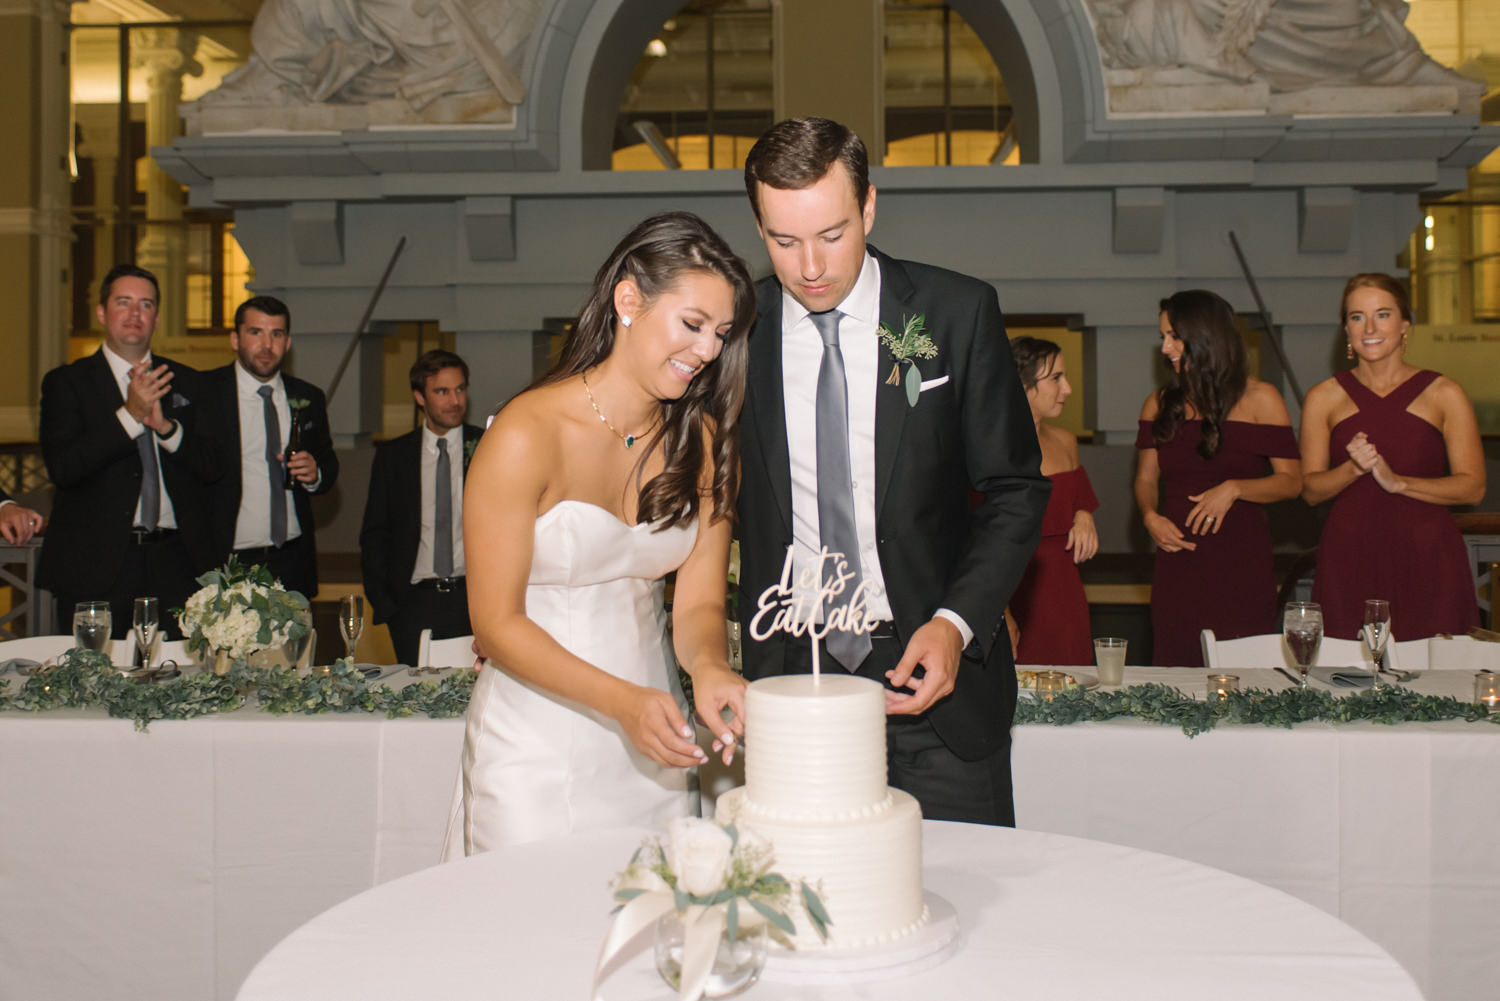 Bride and groom cutting cake at St. Louis Old Post Office and Custom House; St. Louis fine art film wedding photographer Erica Robnett Photography